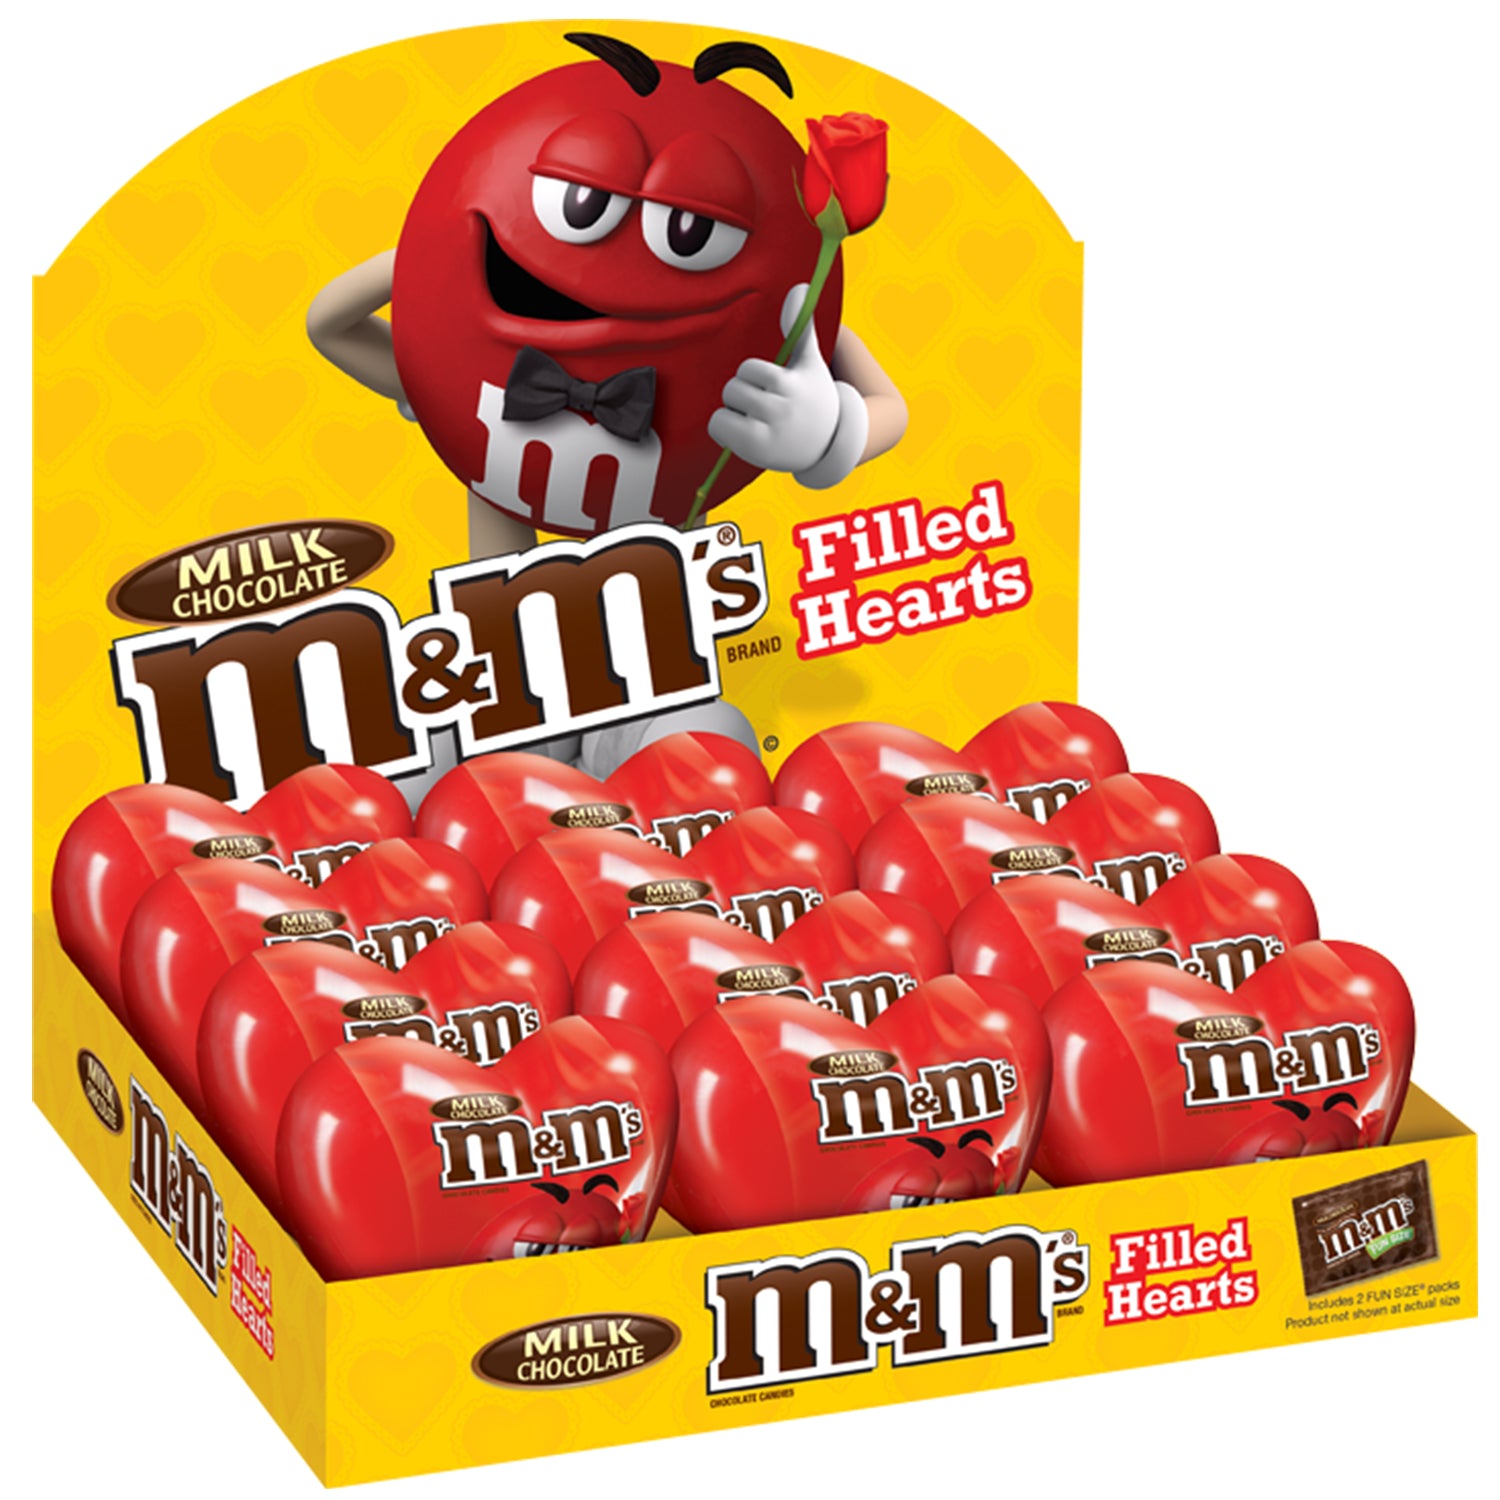 Solved Upon request, the Mars Company (the maker of M&M's)